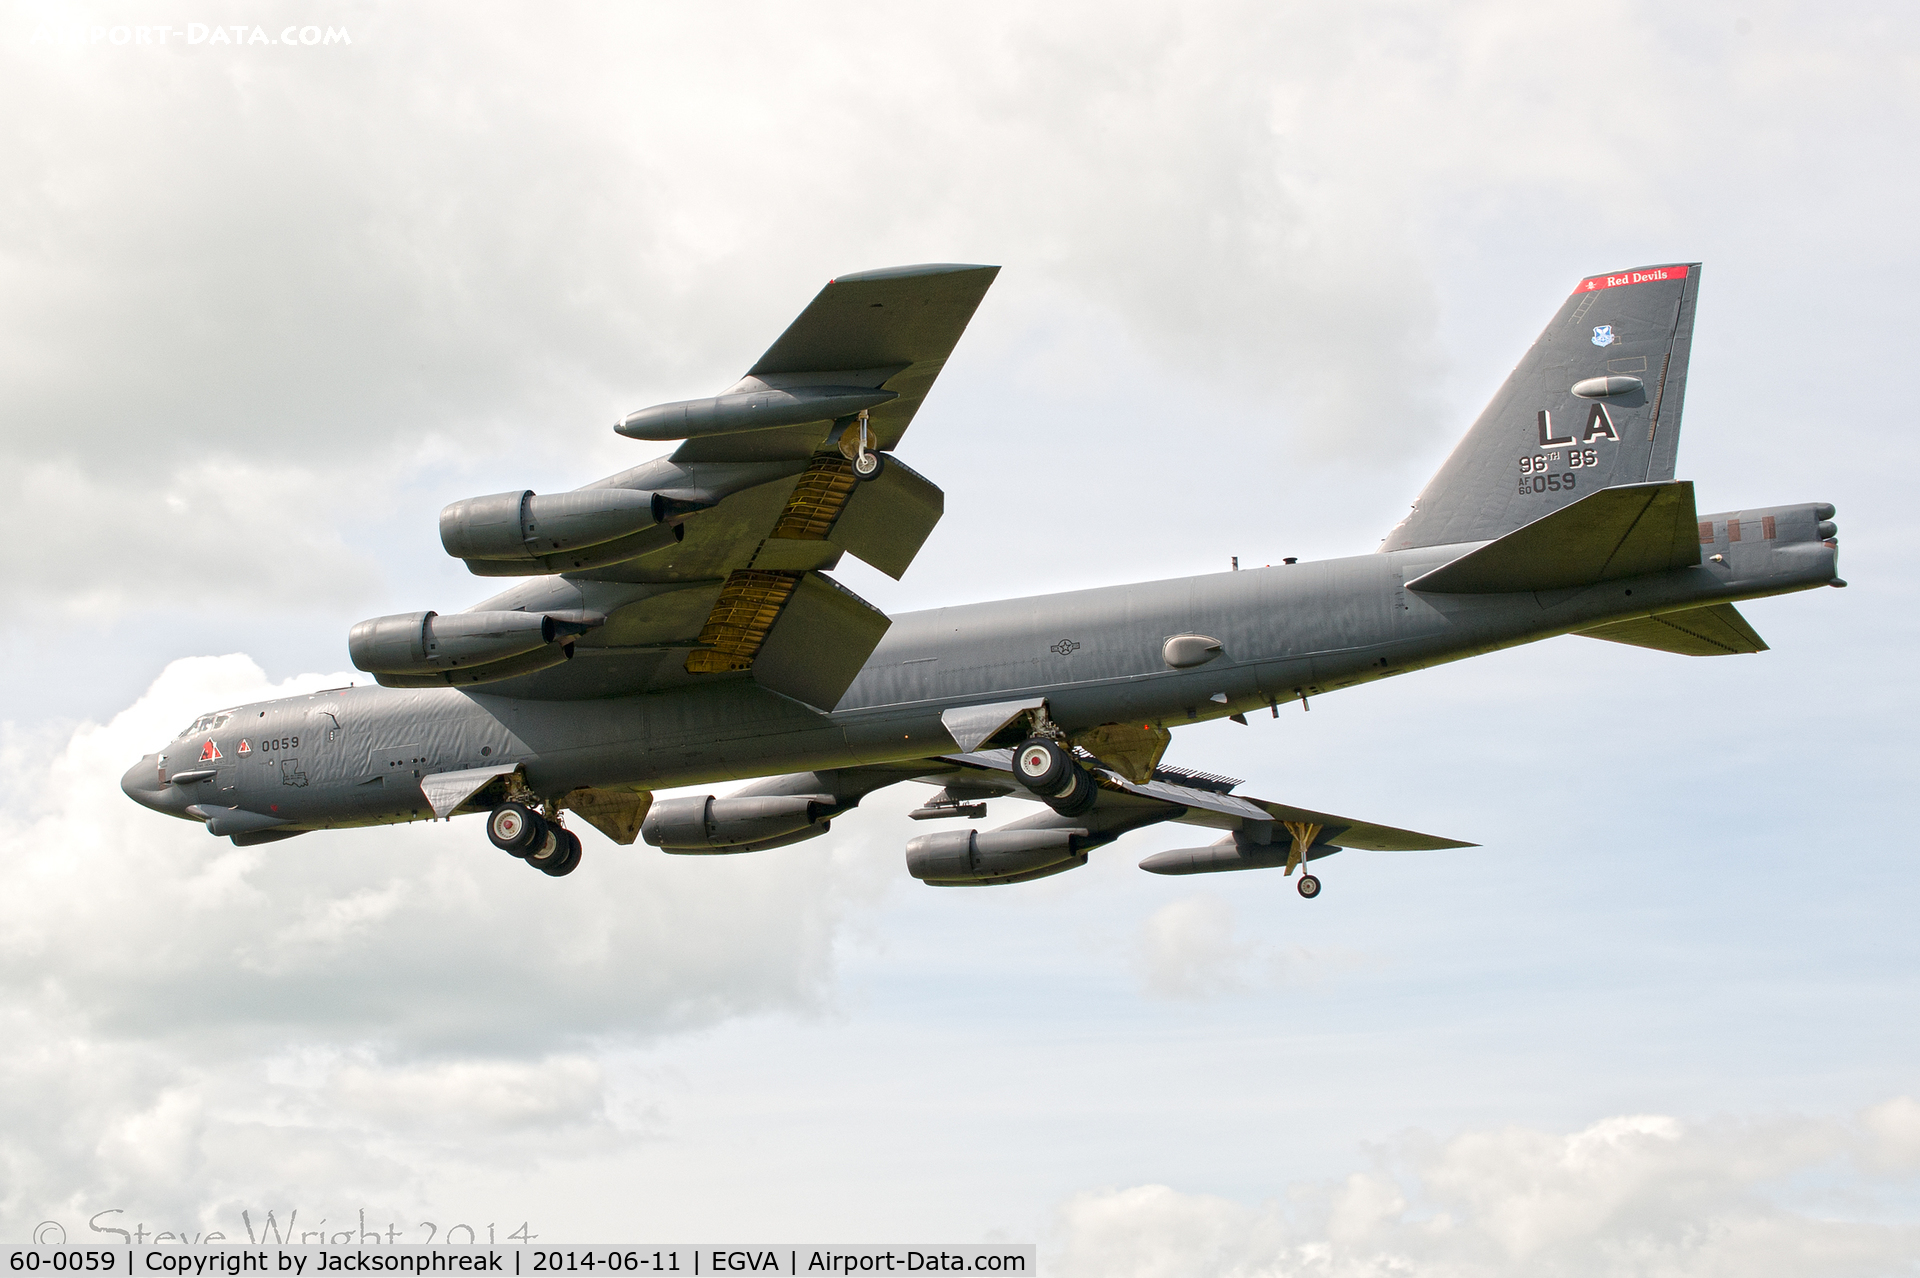 60-0059, 1960 Boeing B-52H Stratofortress C/N 464424, On finals at RAF Fairford, UK